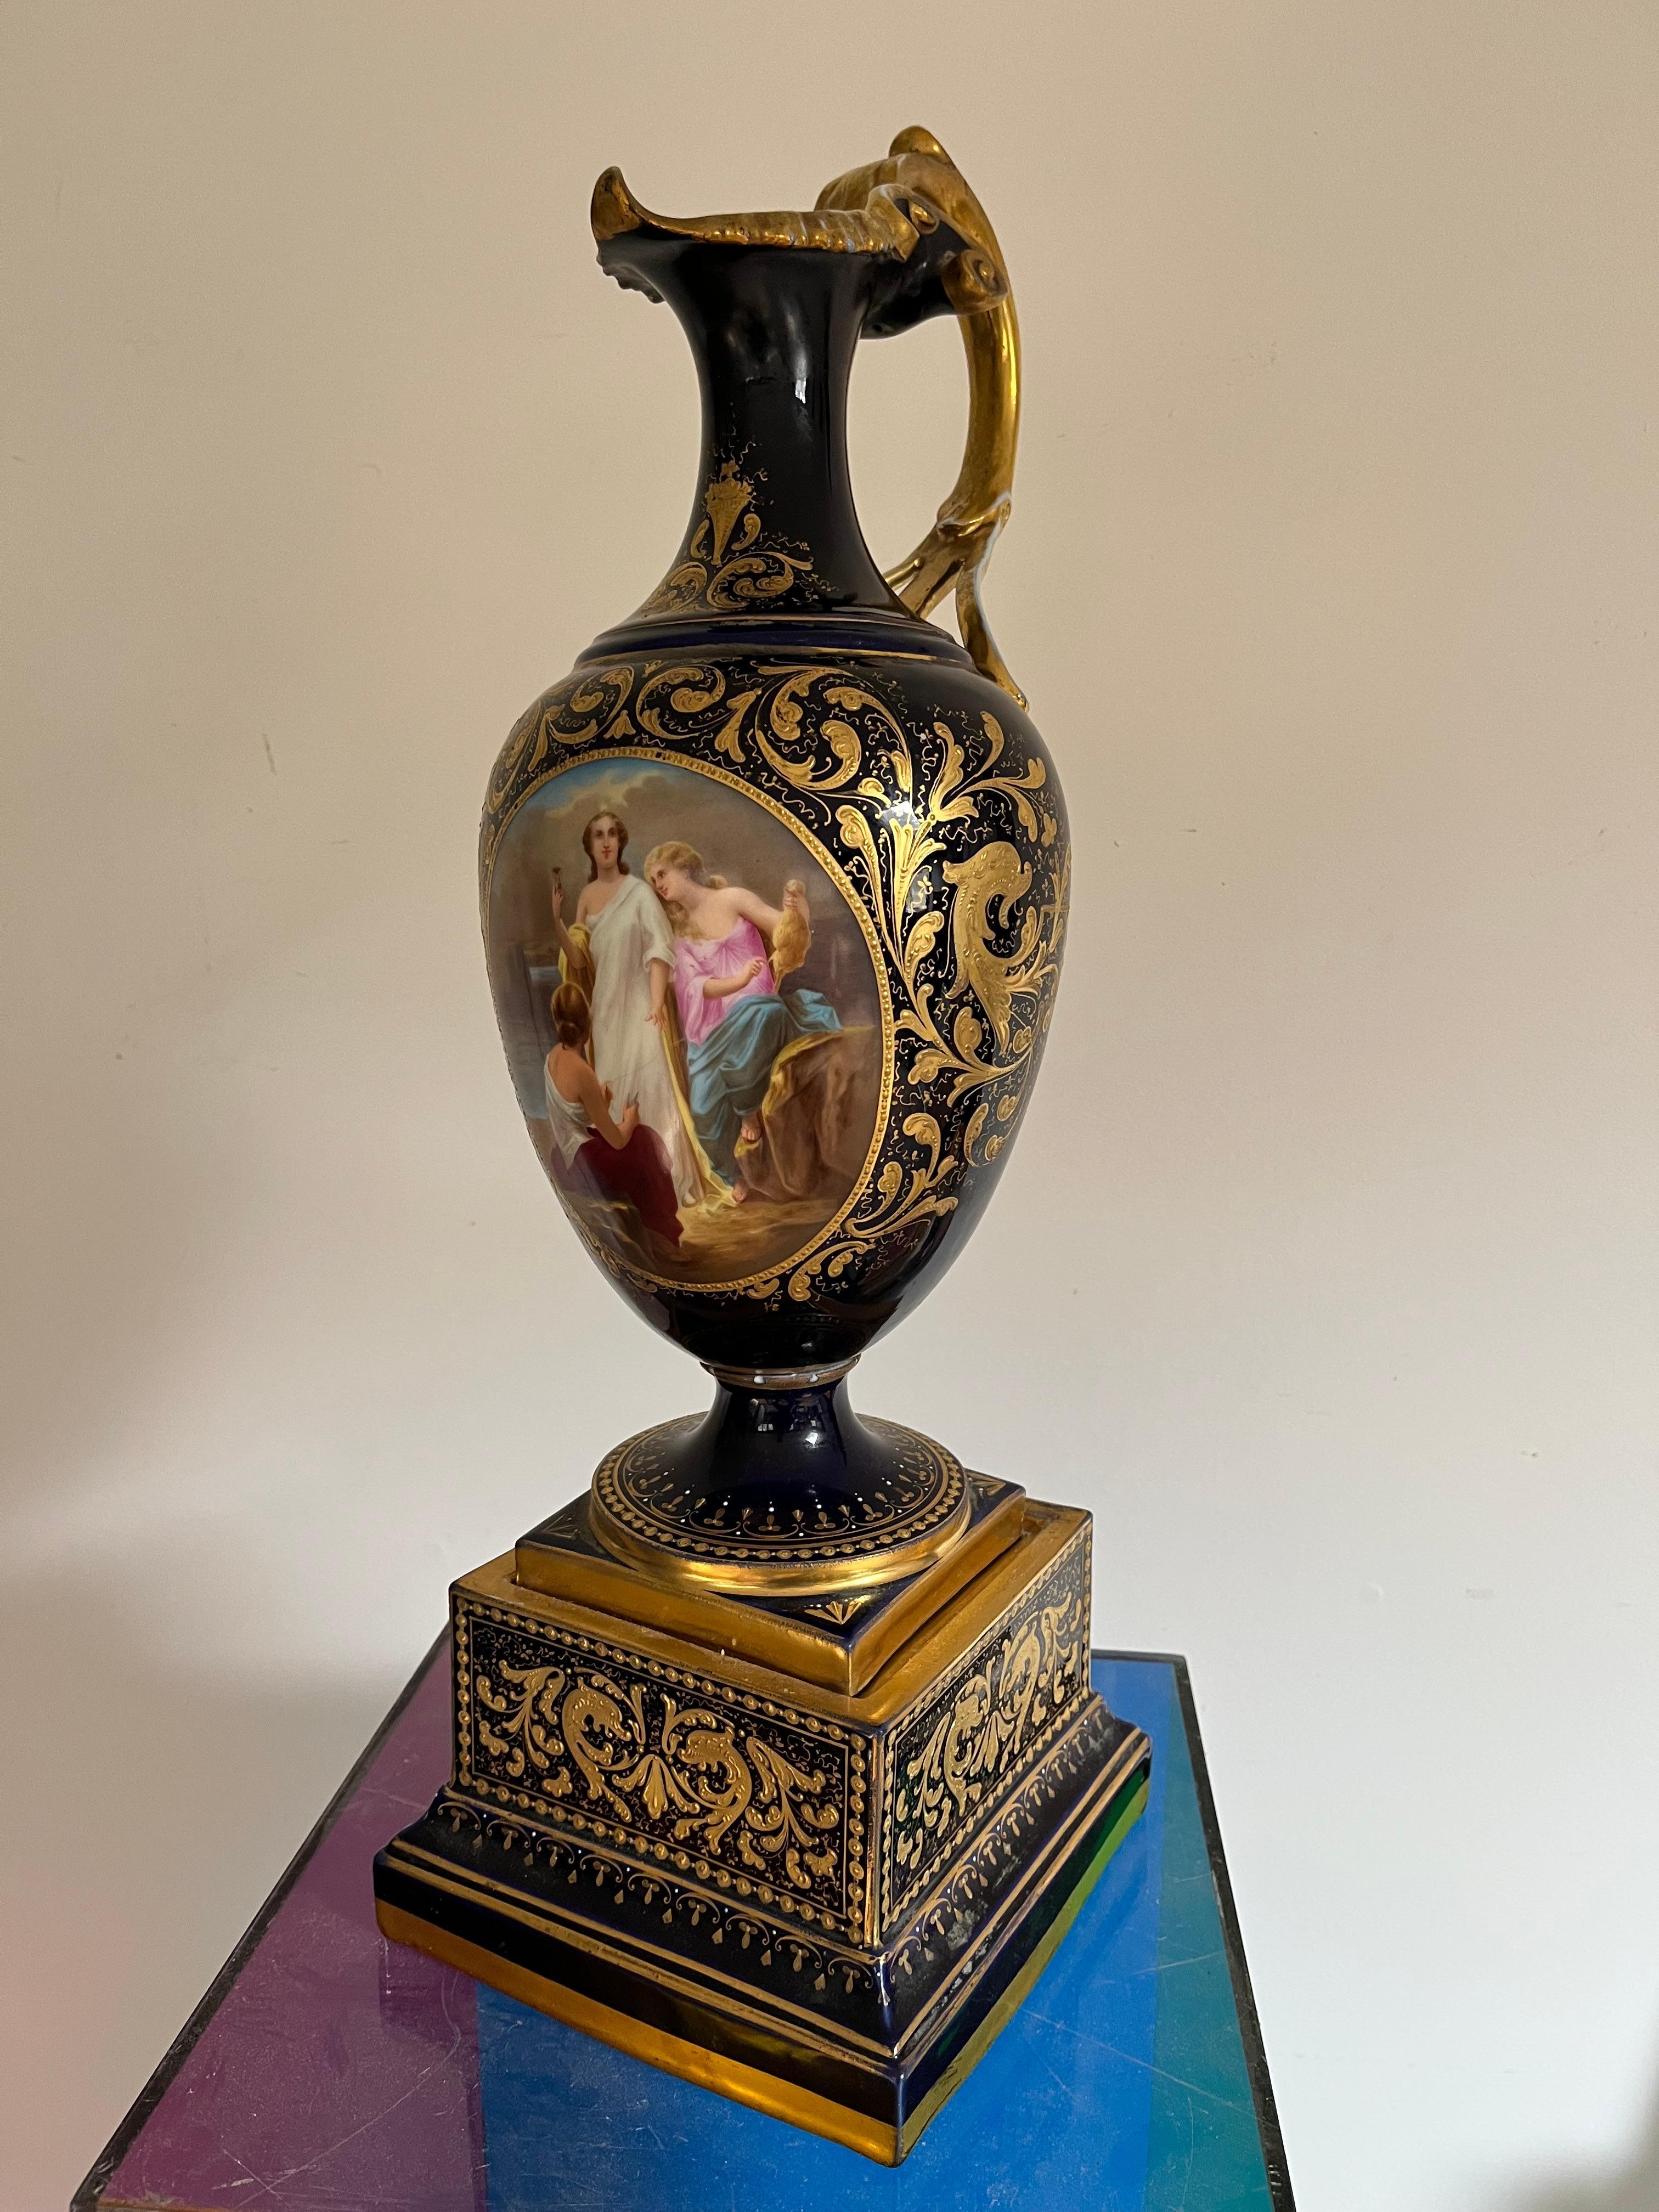 A lovely mid to late 19th century Royal Vienna ewer in deep blue glaze with a pictorial panel depicting two women seated spinning yarn with another woman standing holding an hour glass. The ewer is abundantly decorated with gilt details and the